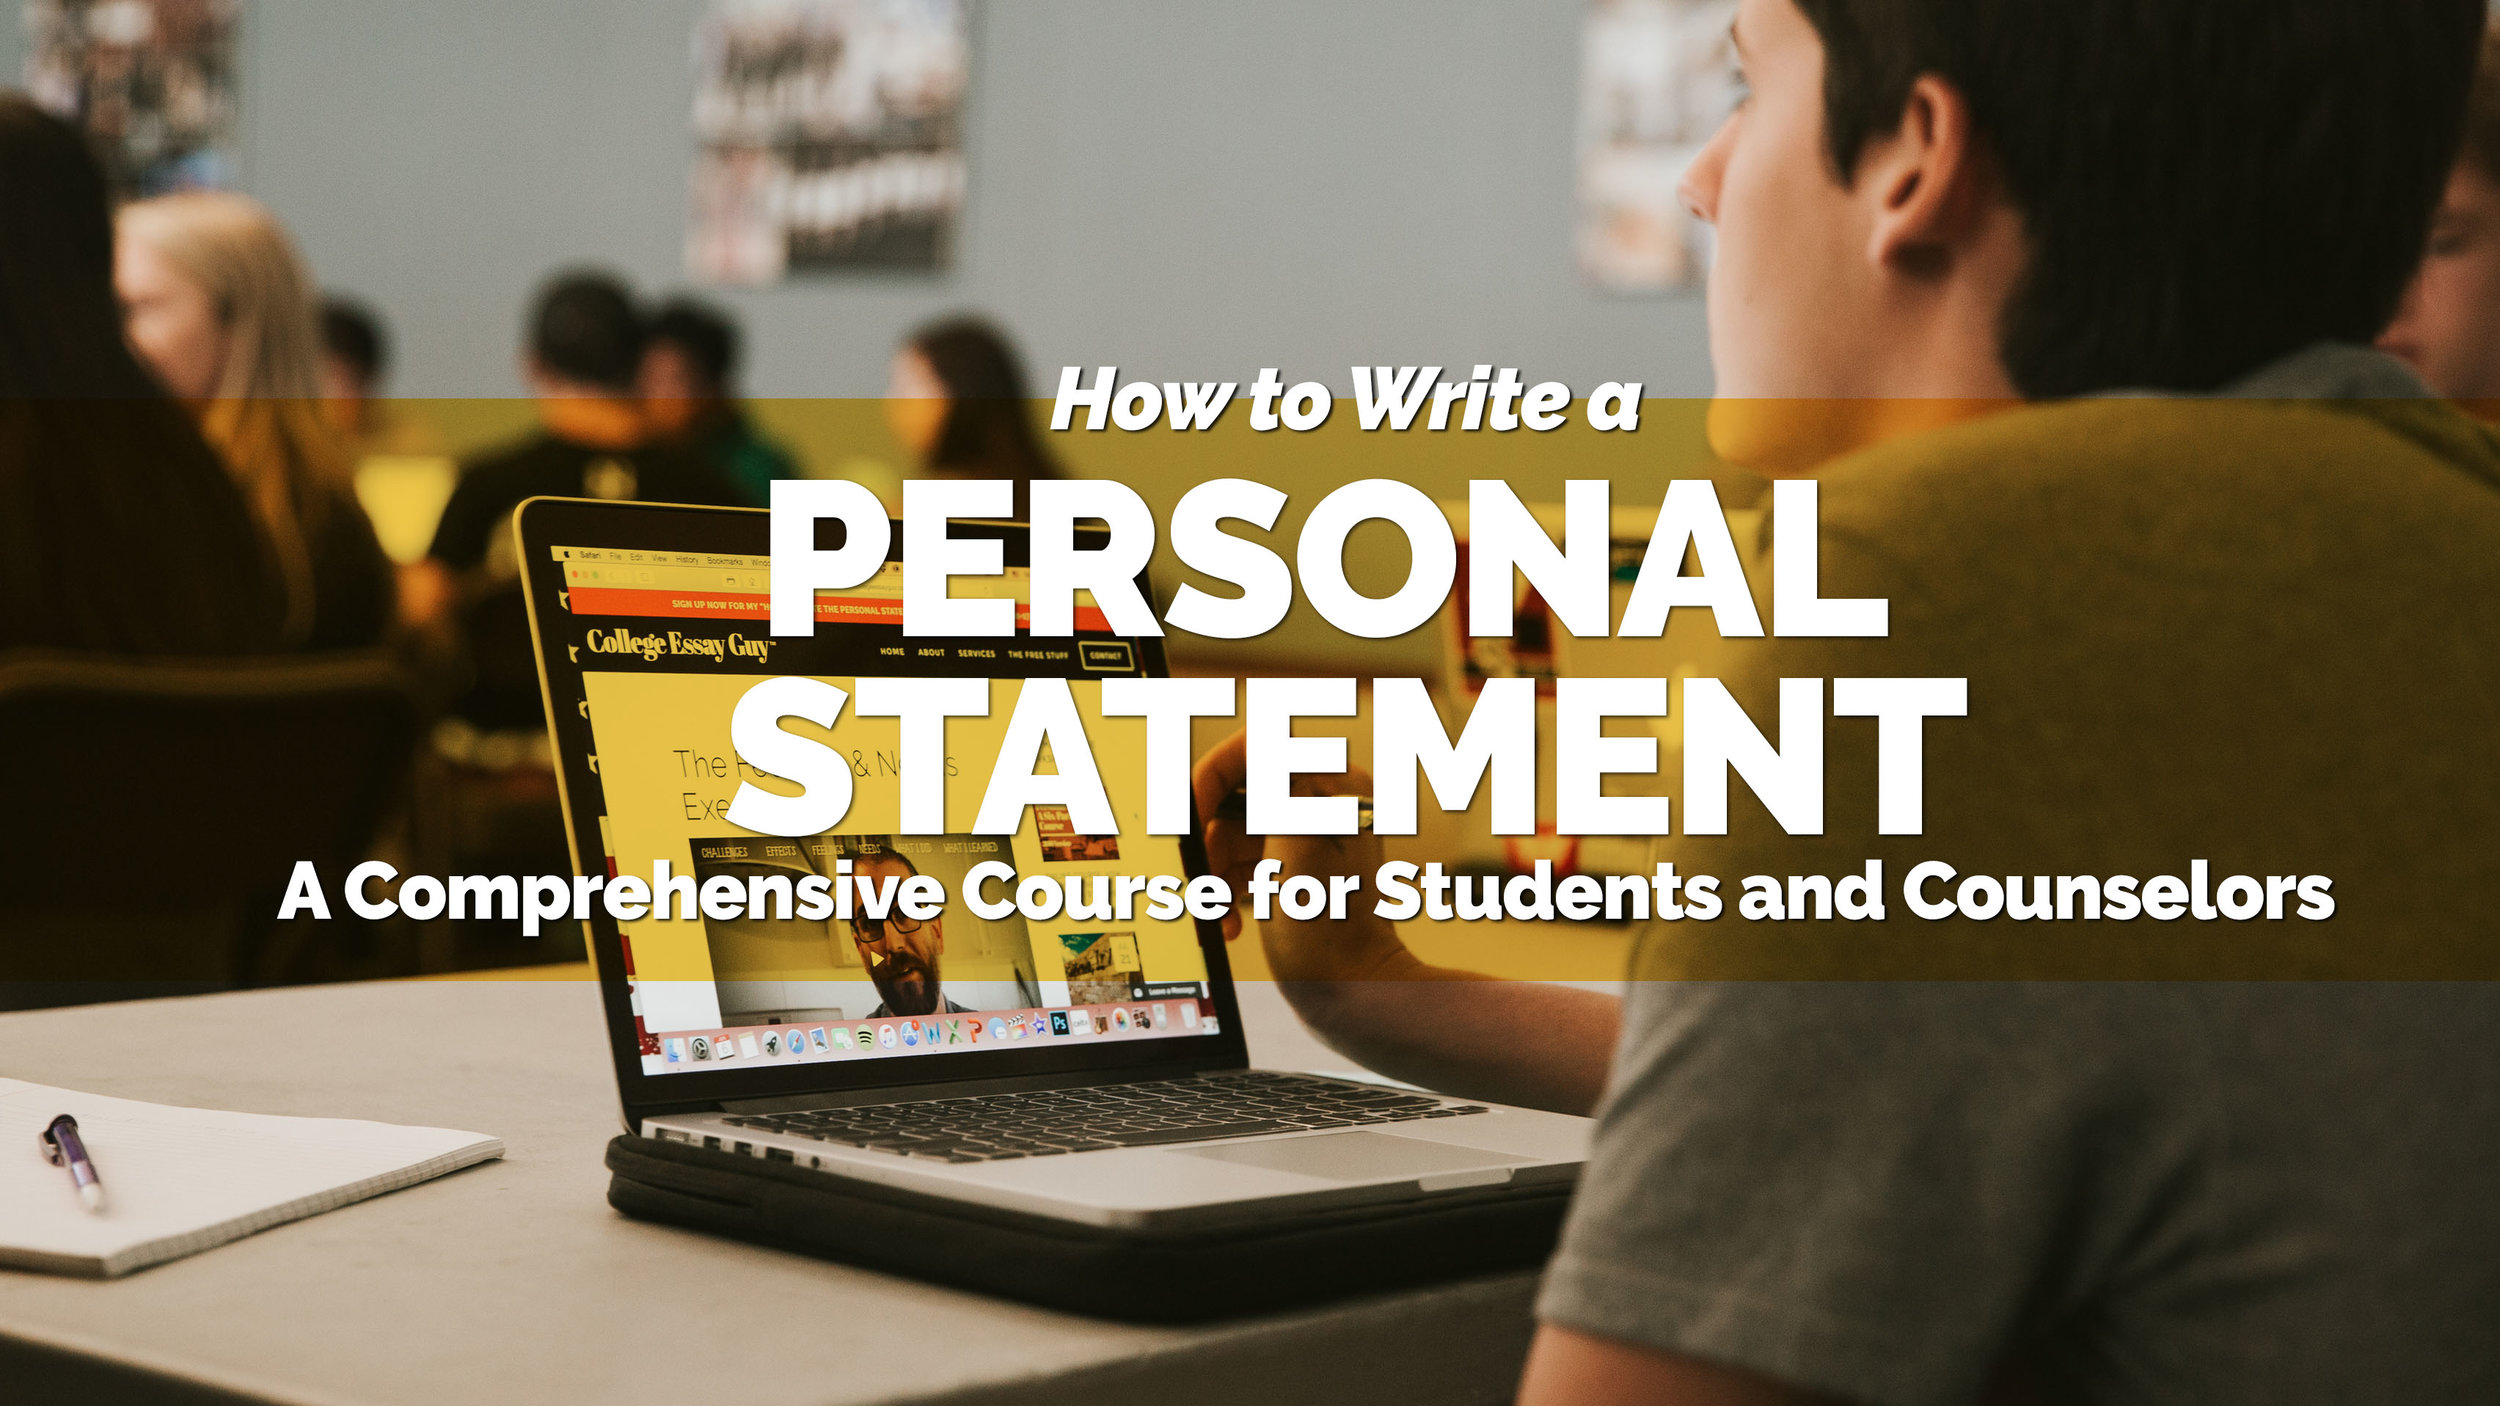 How to Write a Personal Statement.JPG